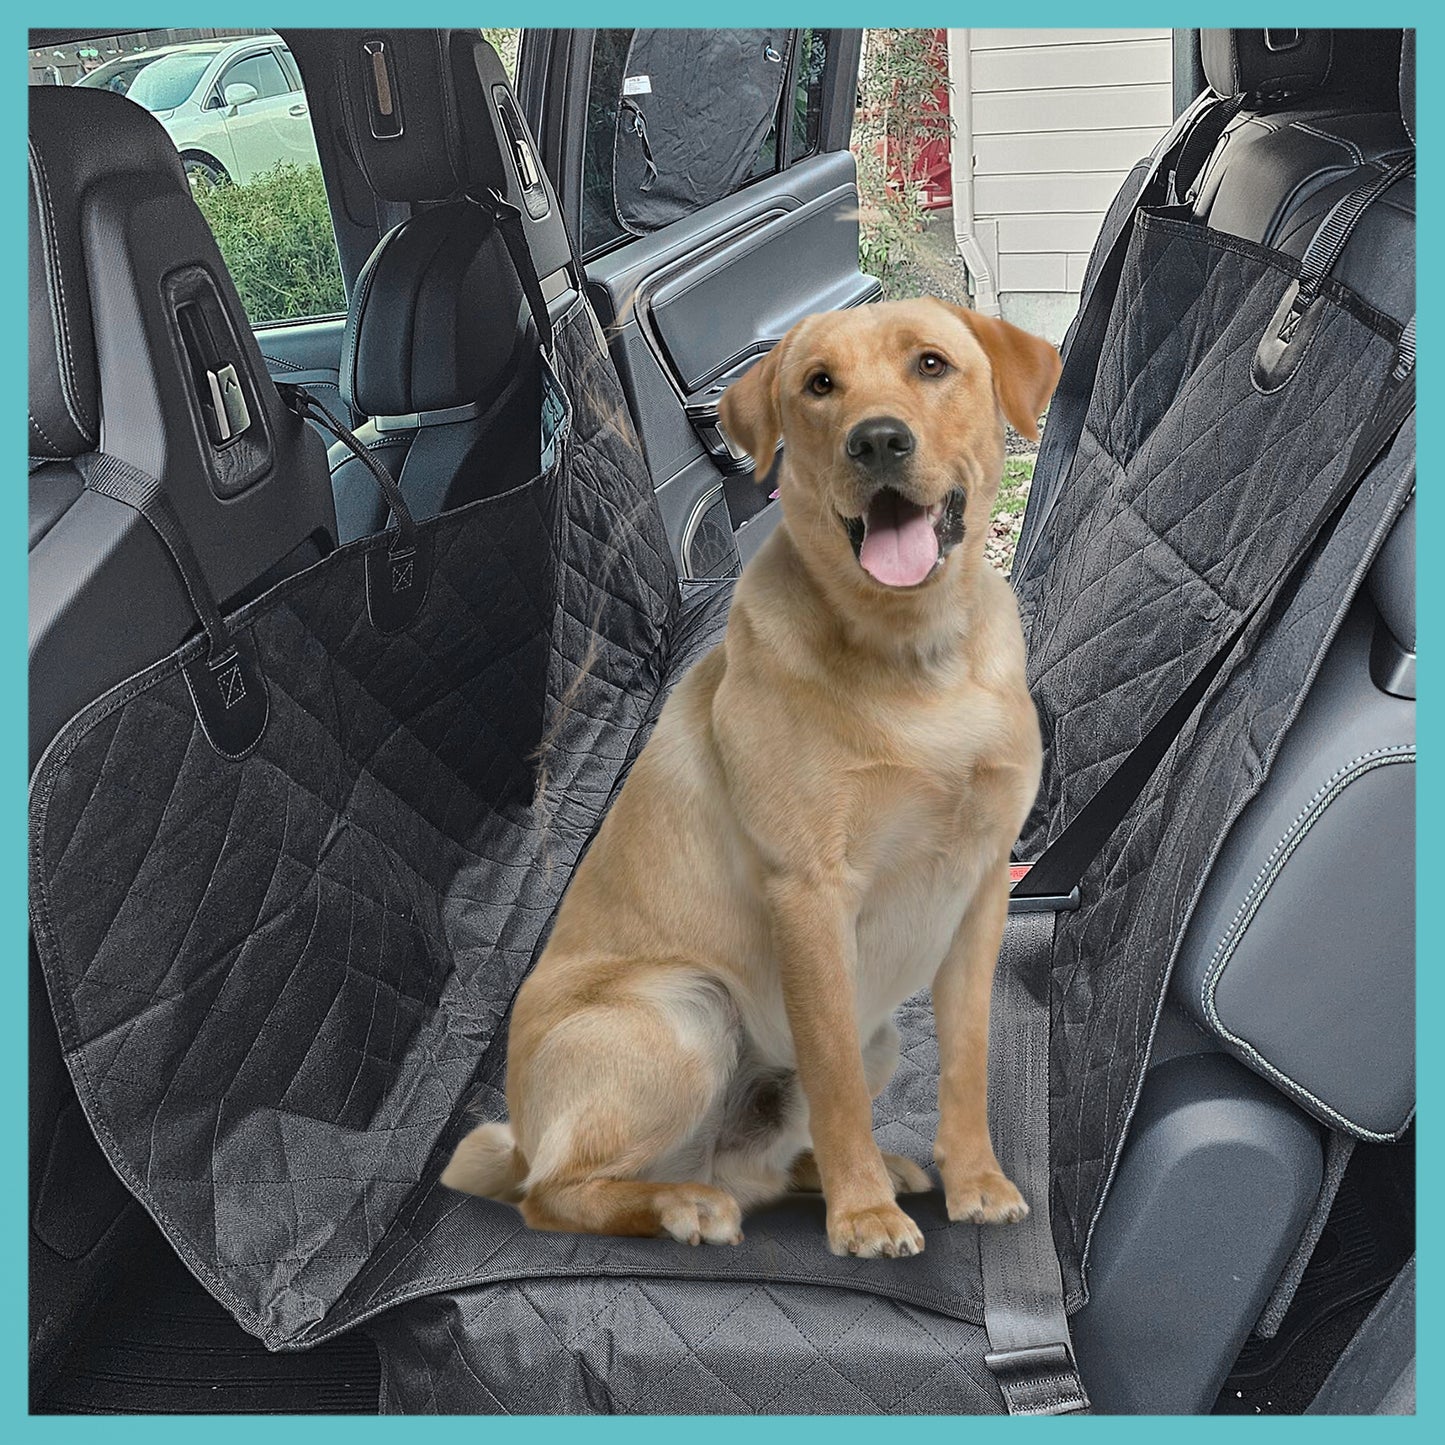 Pet Seat Cover Dog compatible with Rivian from BestEvMod